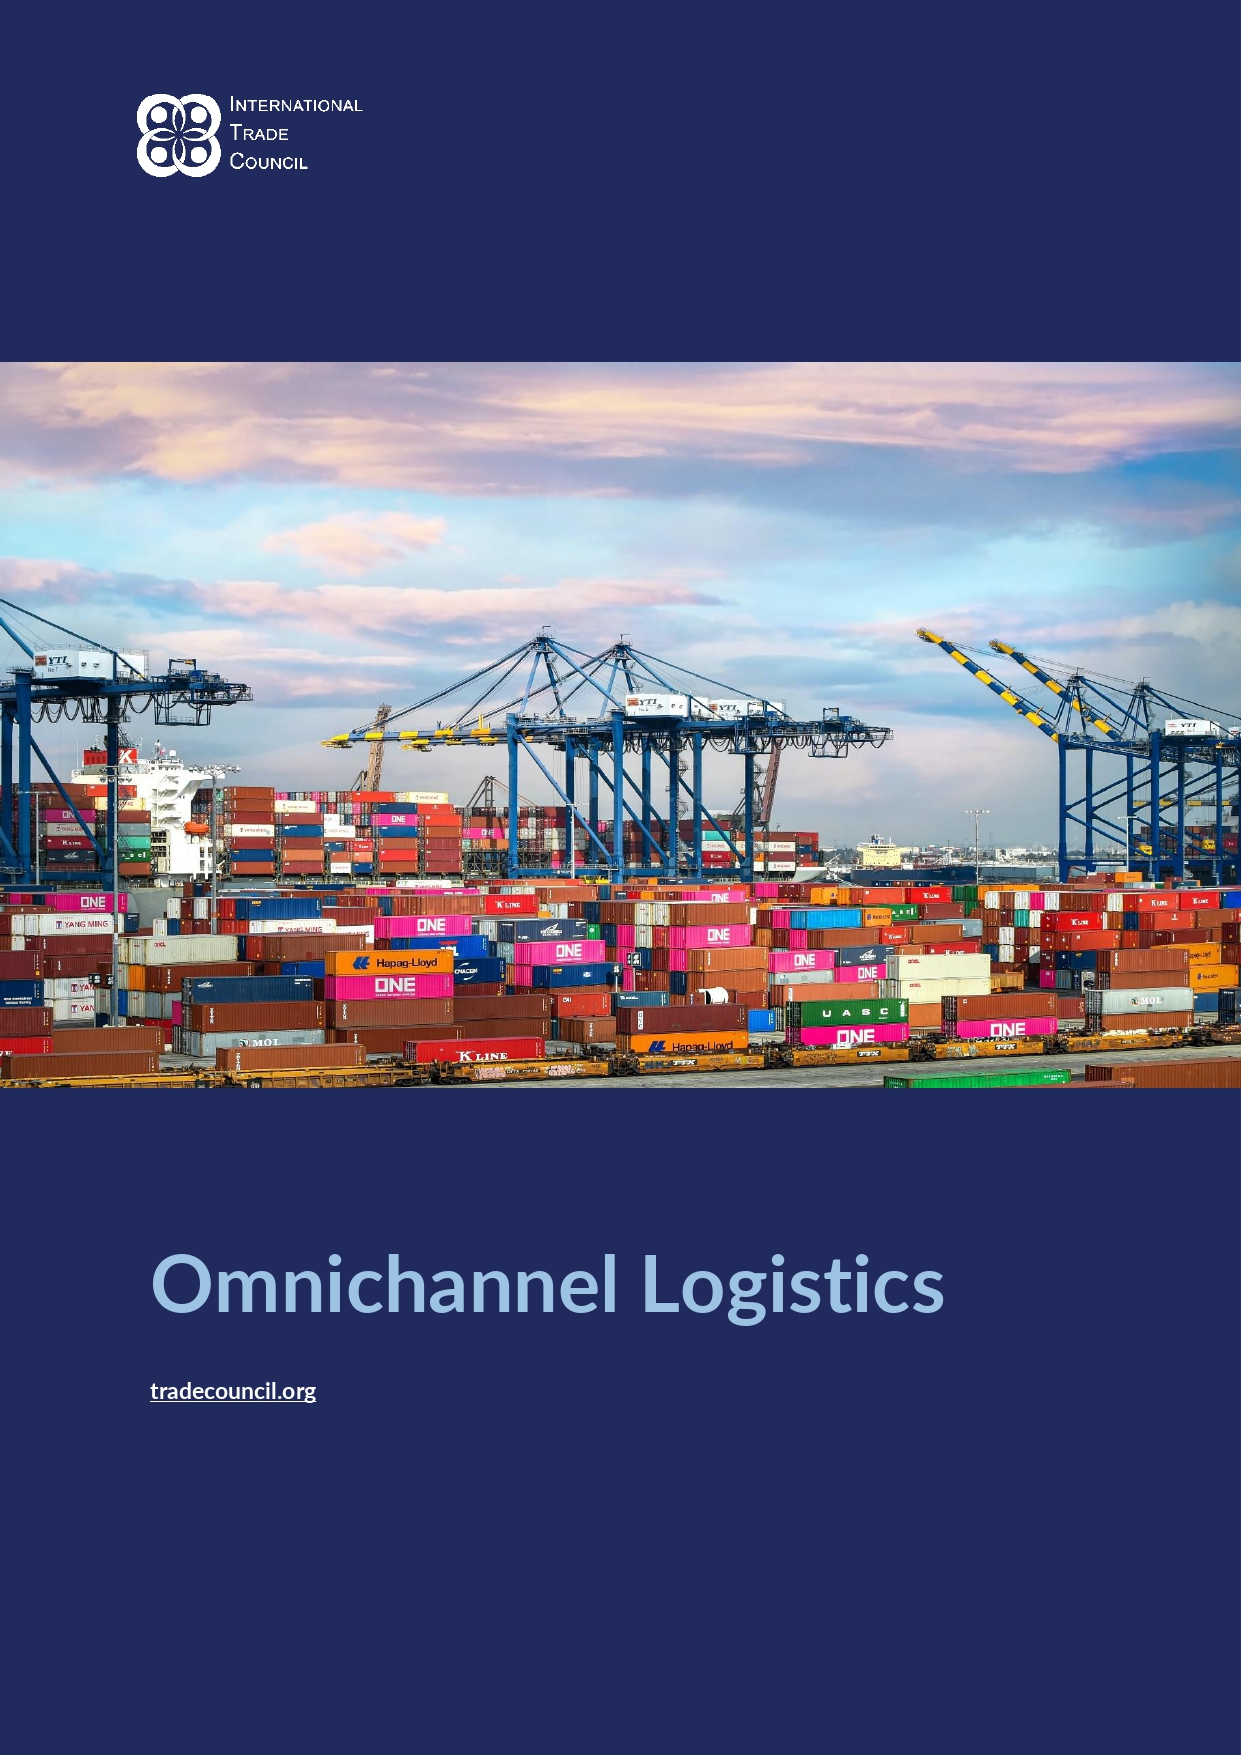 Omnichannel logistics from the International Trade Council - your international chamber of commerce for importers, exporters and foreign direct investment